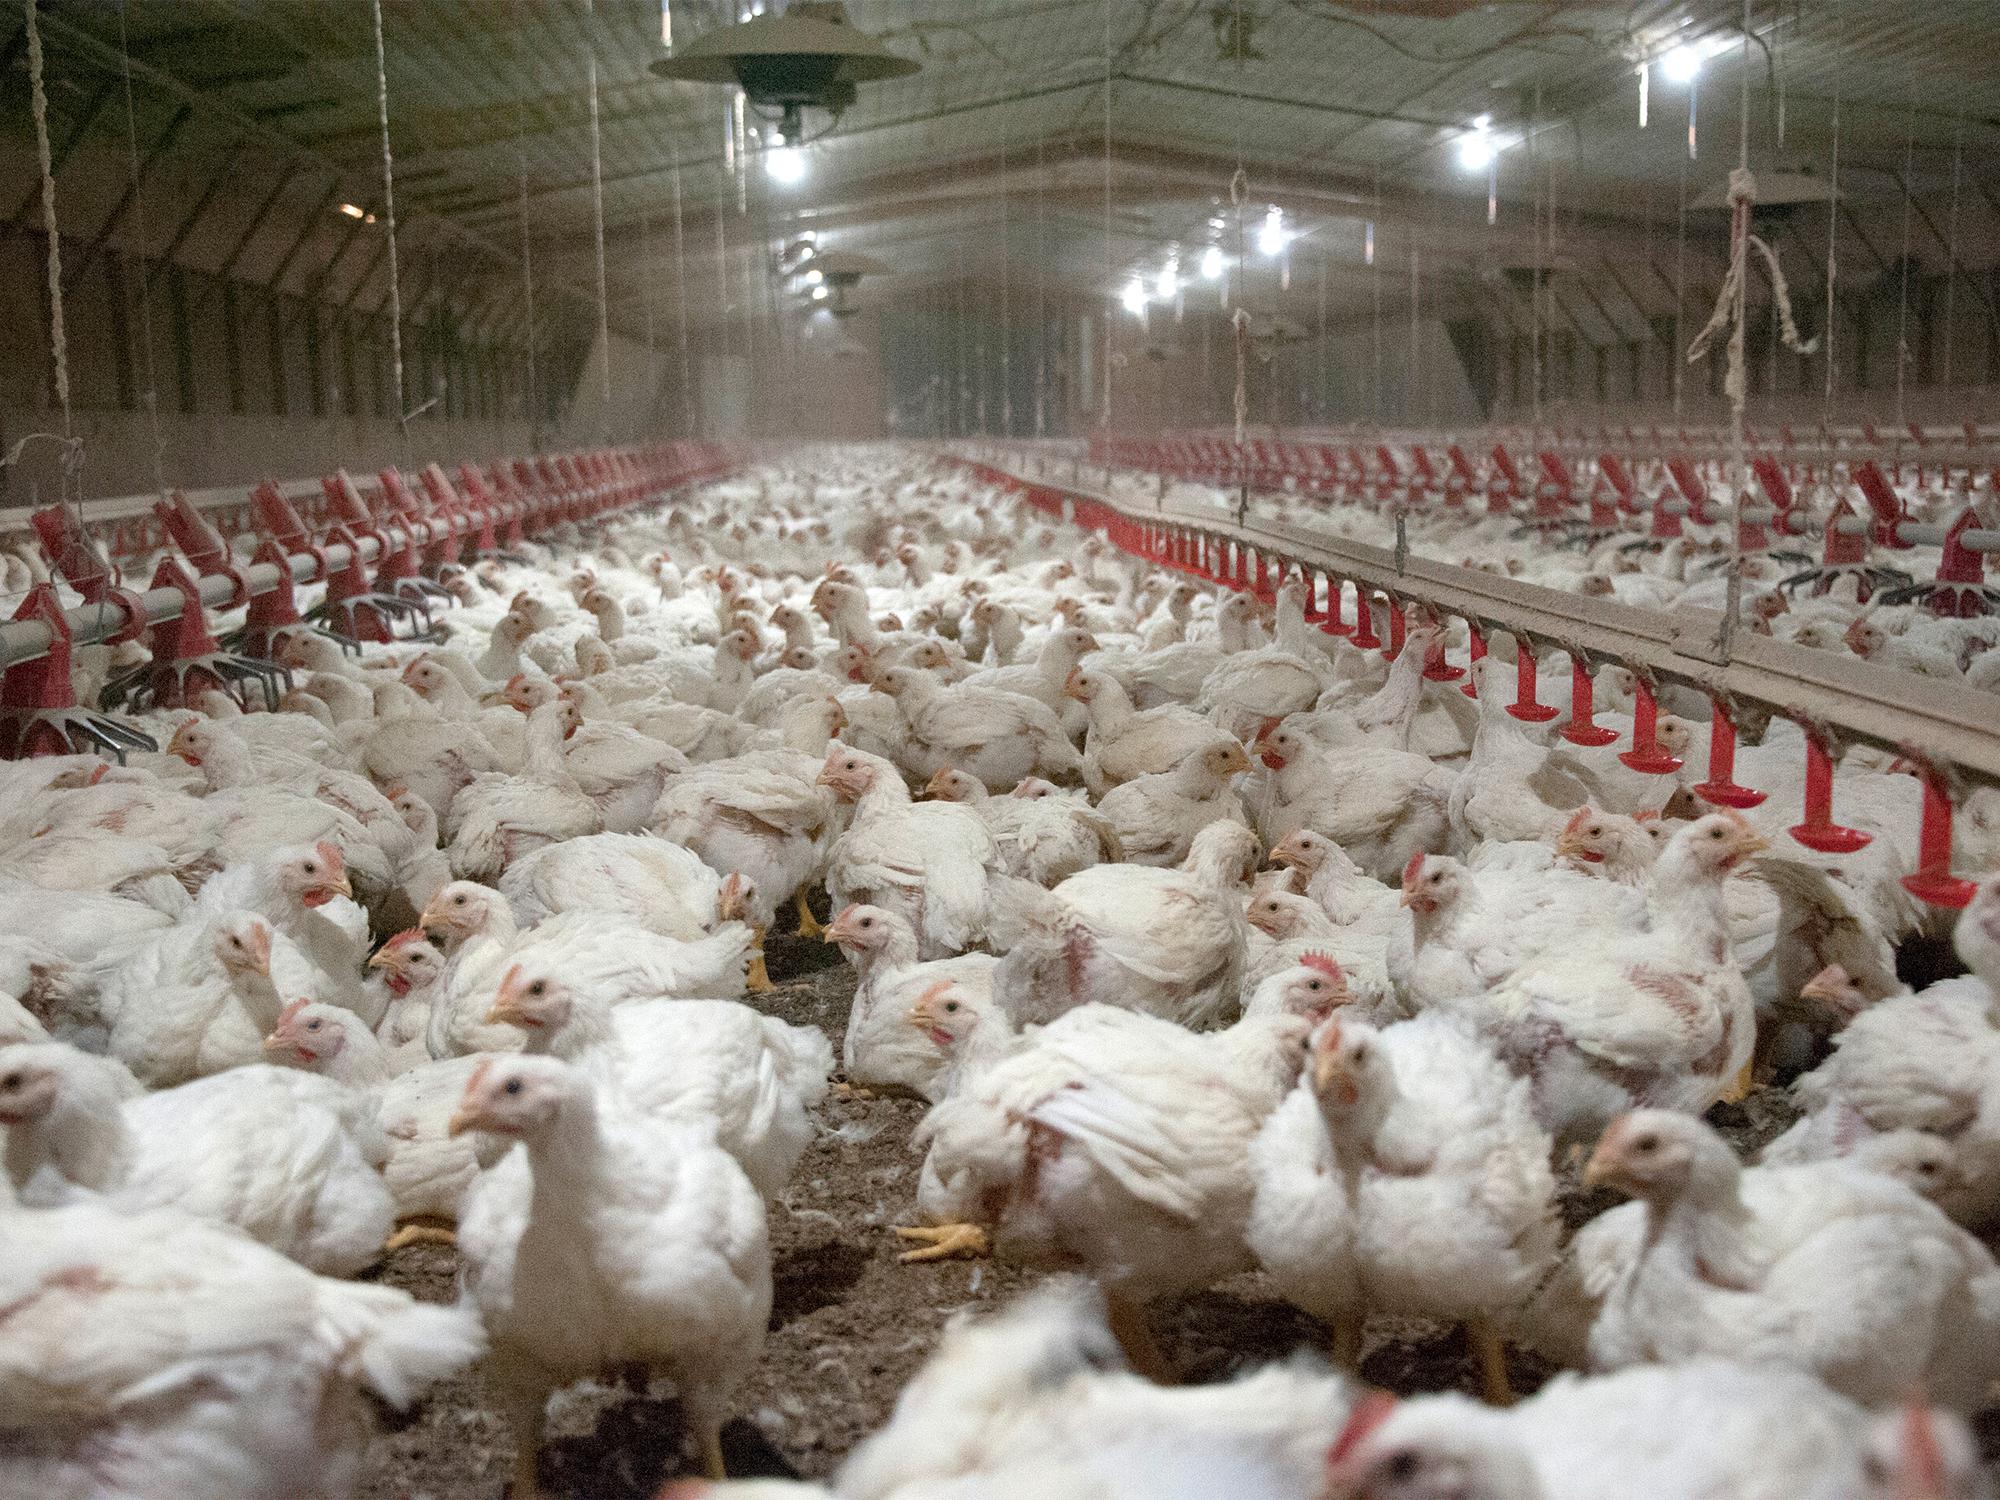 Scores of chickens are seen inside a poultry house.